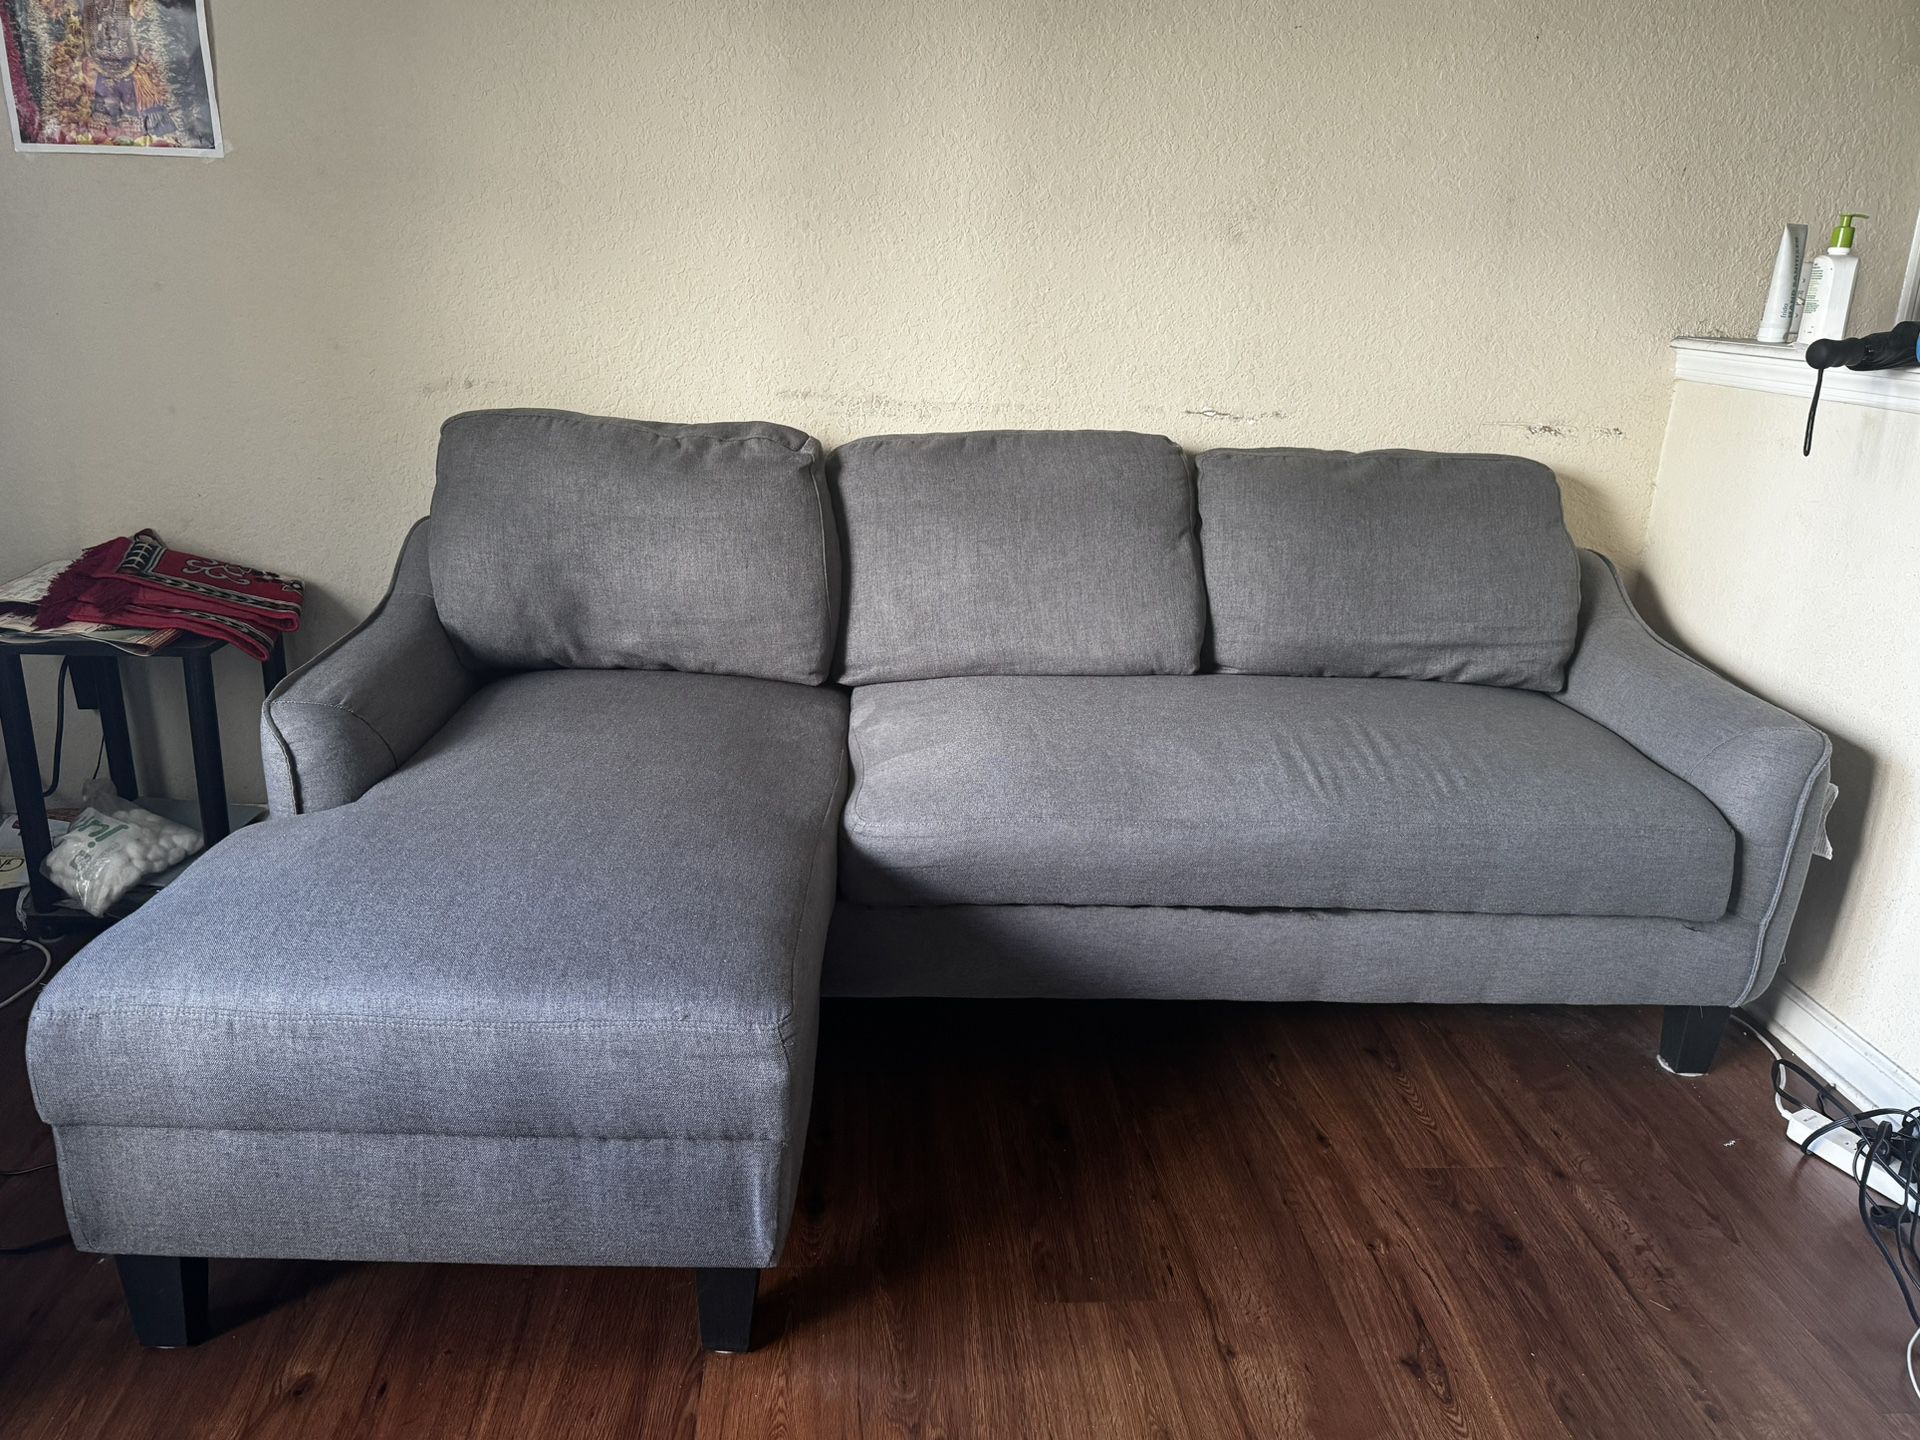 Sofa bed - Chaise